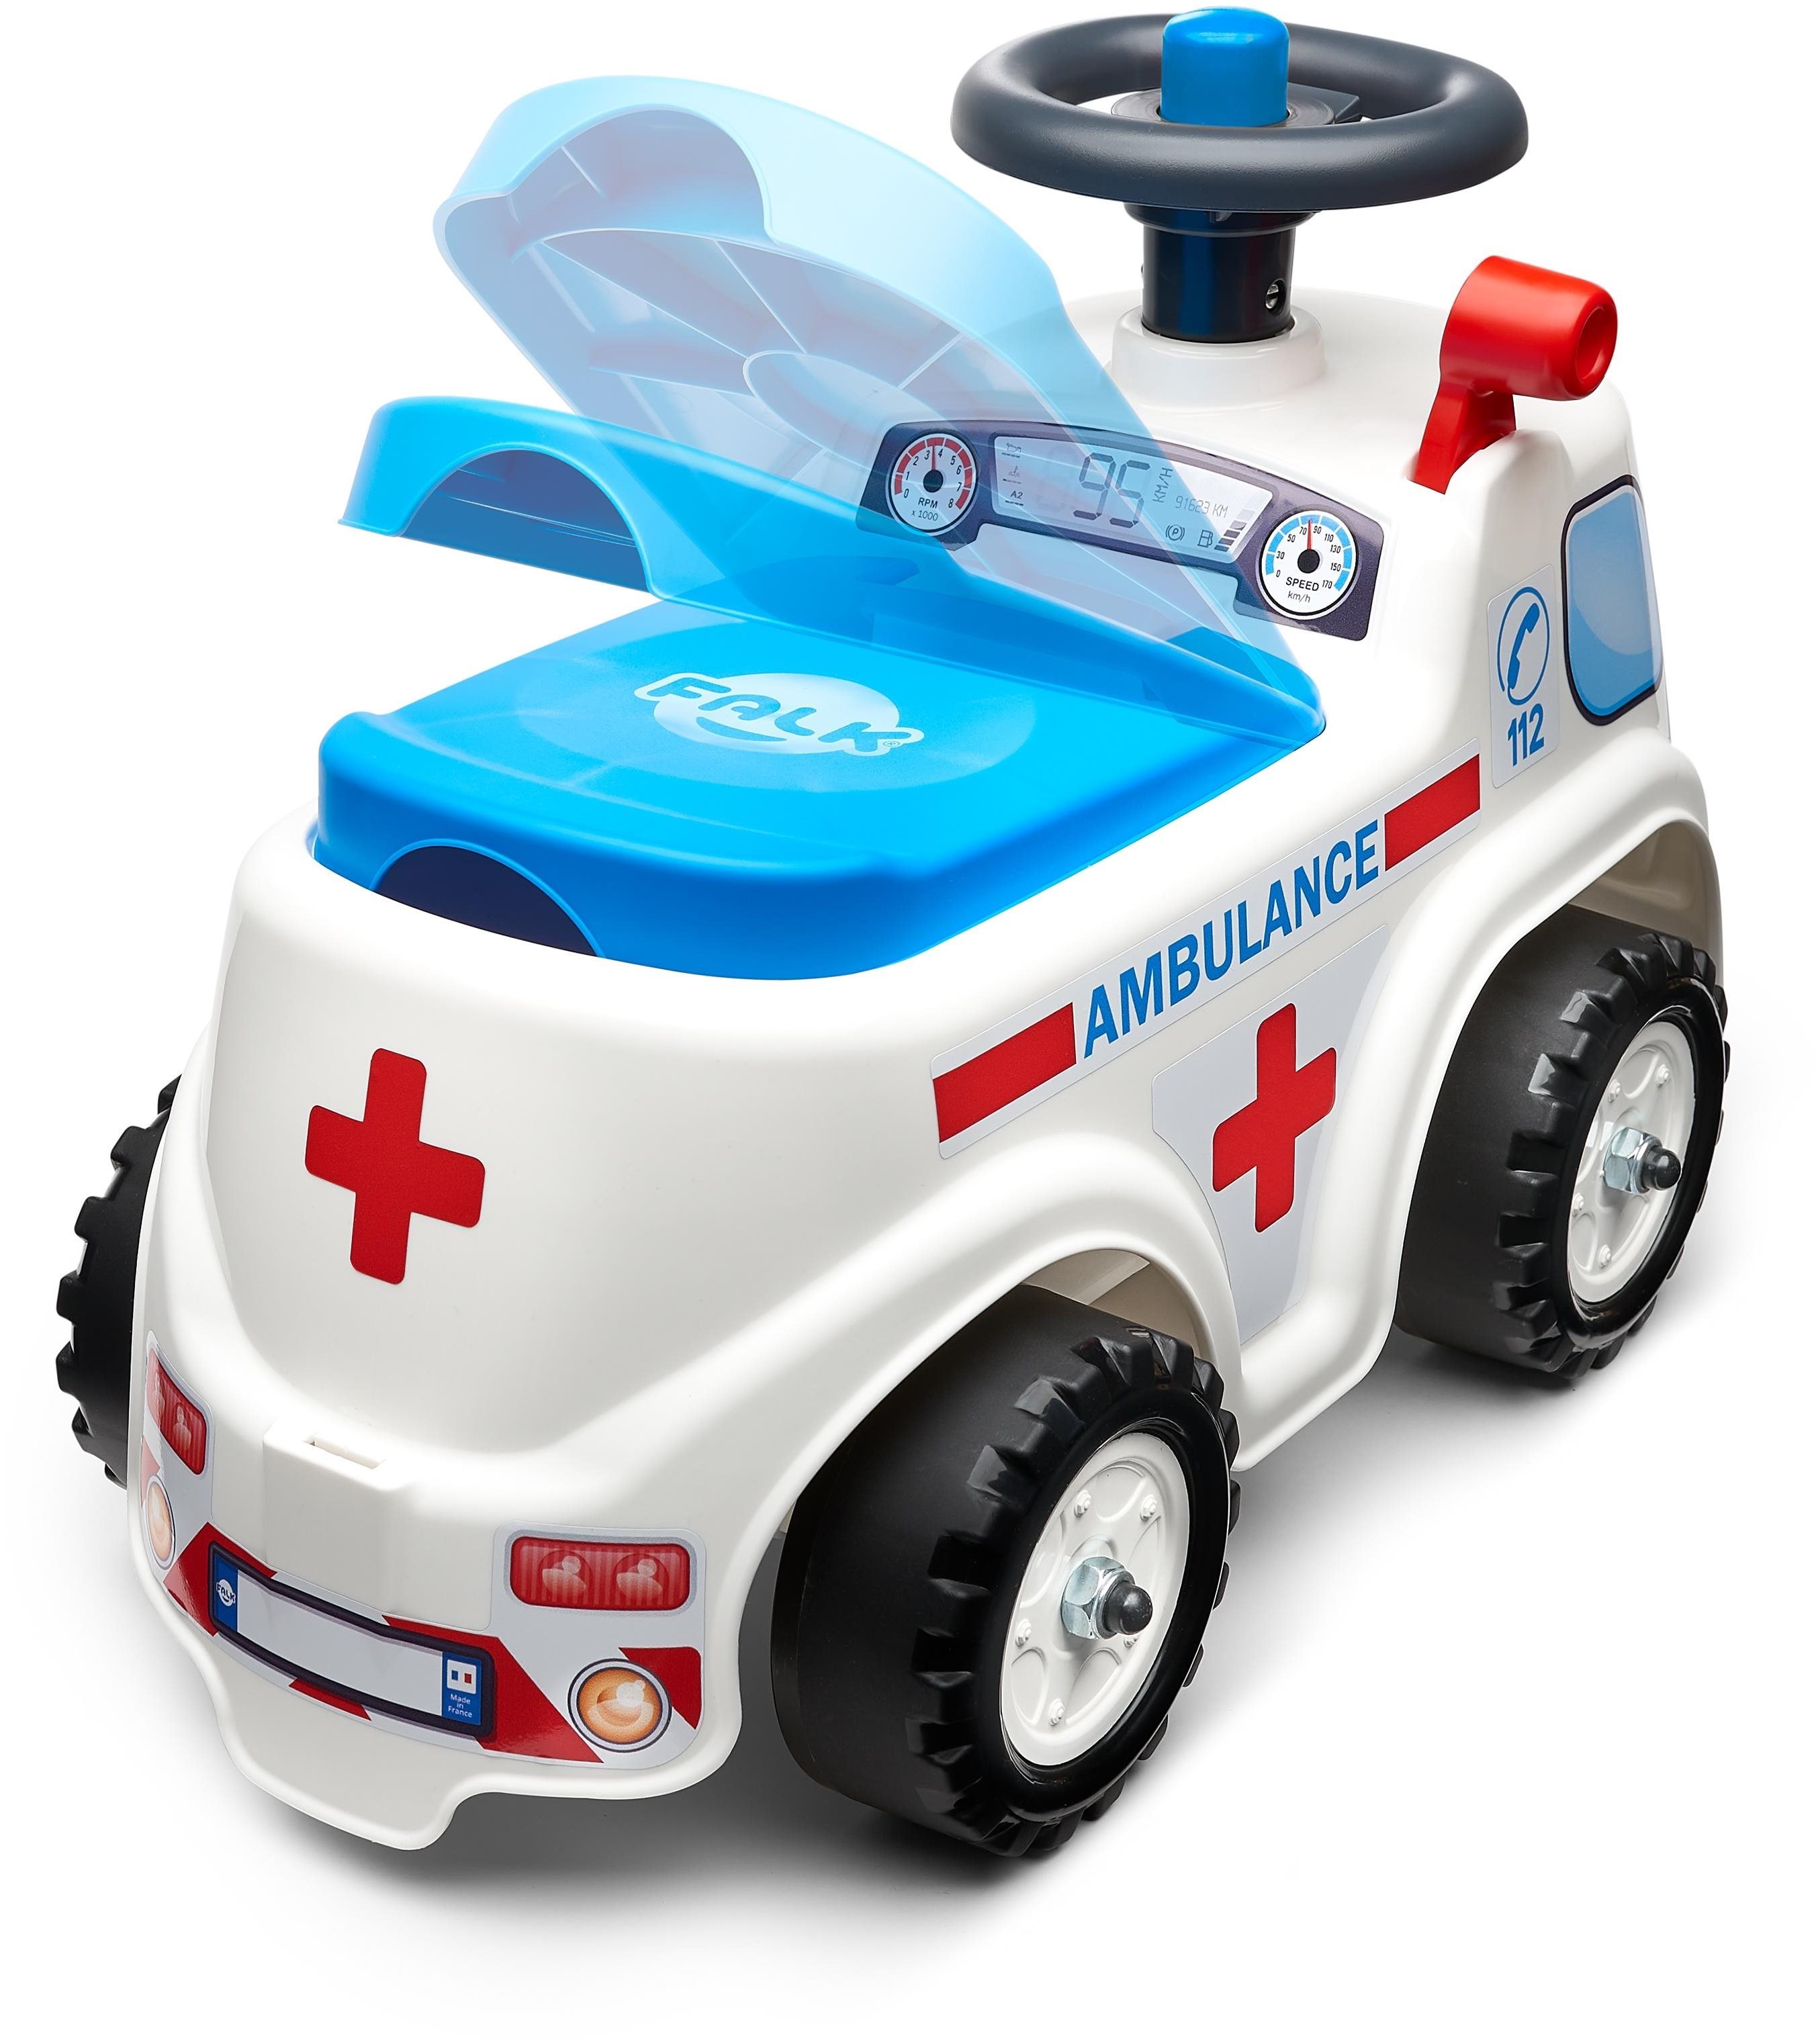 Balance Bike Falk Ambulance Balance Bike with an Opening Seat and a Horn on the Steering Wheel Lateral view